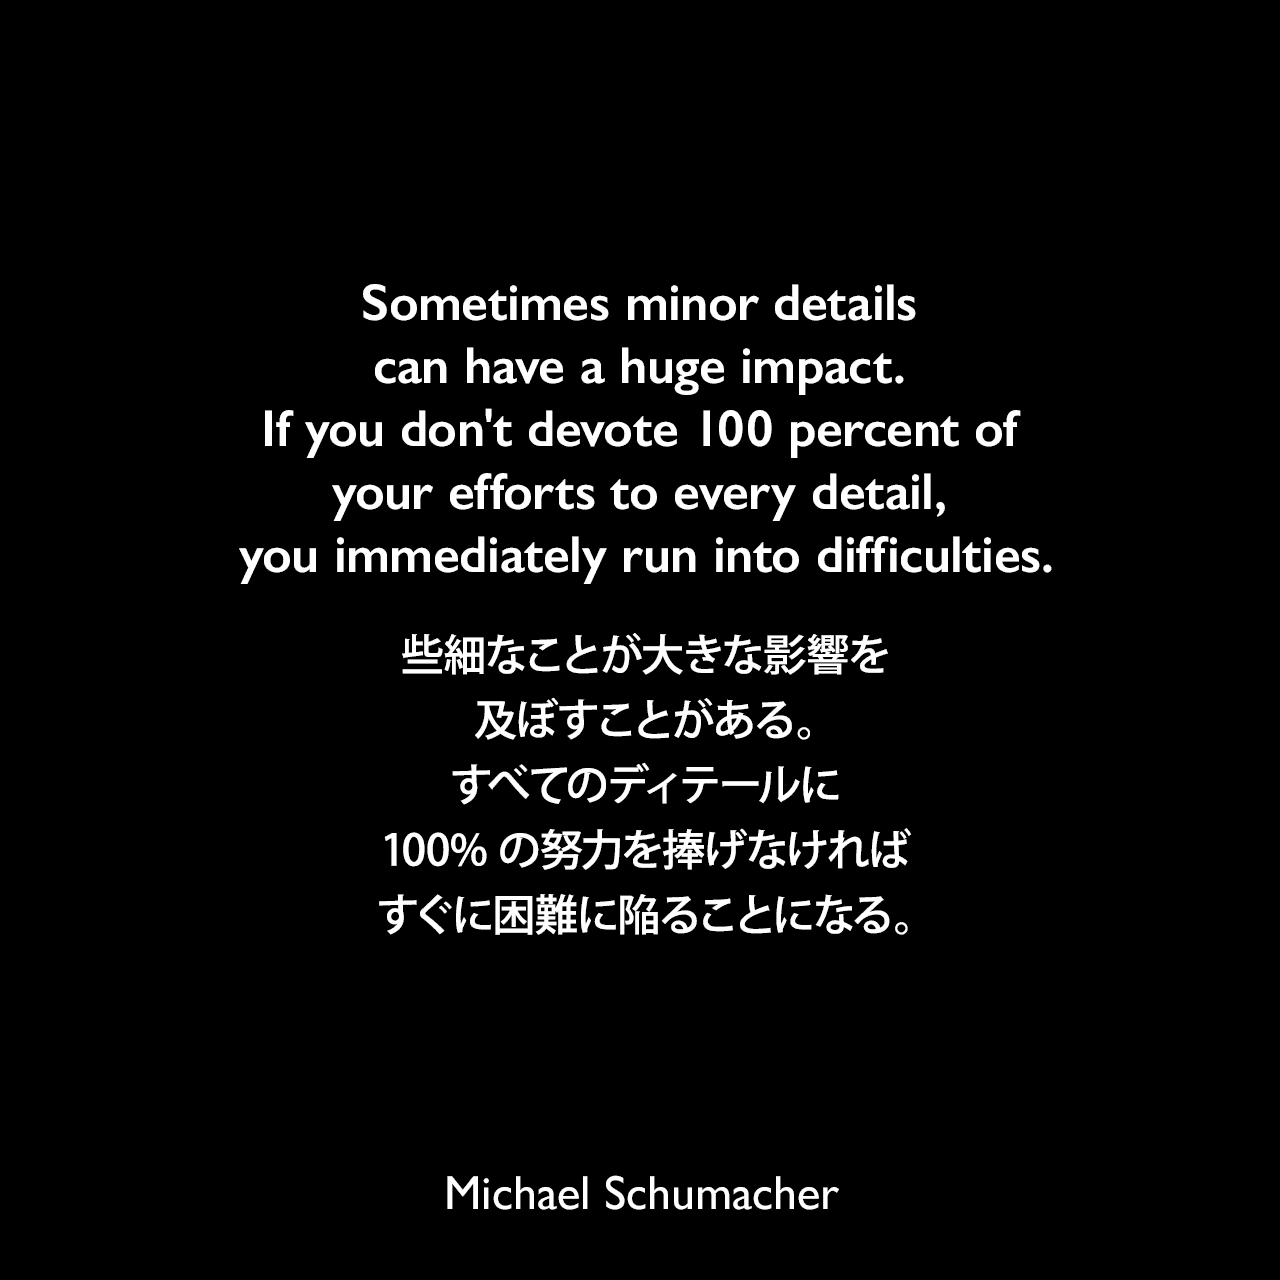 Sometimes minor details can have a huge impact. If you don’t devote 100 percent of your efforts to every detail, you immediately run into difficulties.些細なことが大きな影響を及ぼすことがある。すべてのディテールに100%の努力を捧げなければ、すぐに困難に陥ることになる。